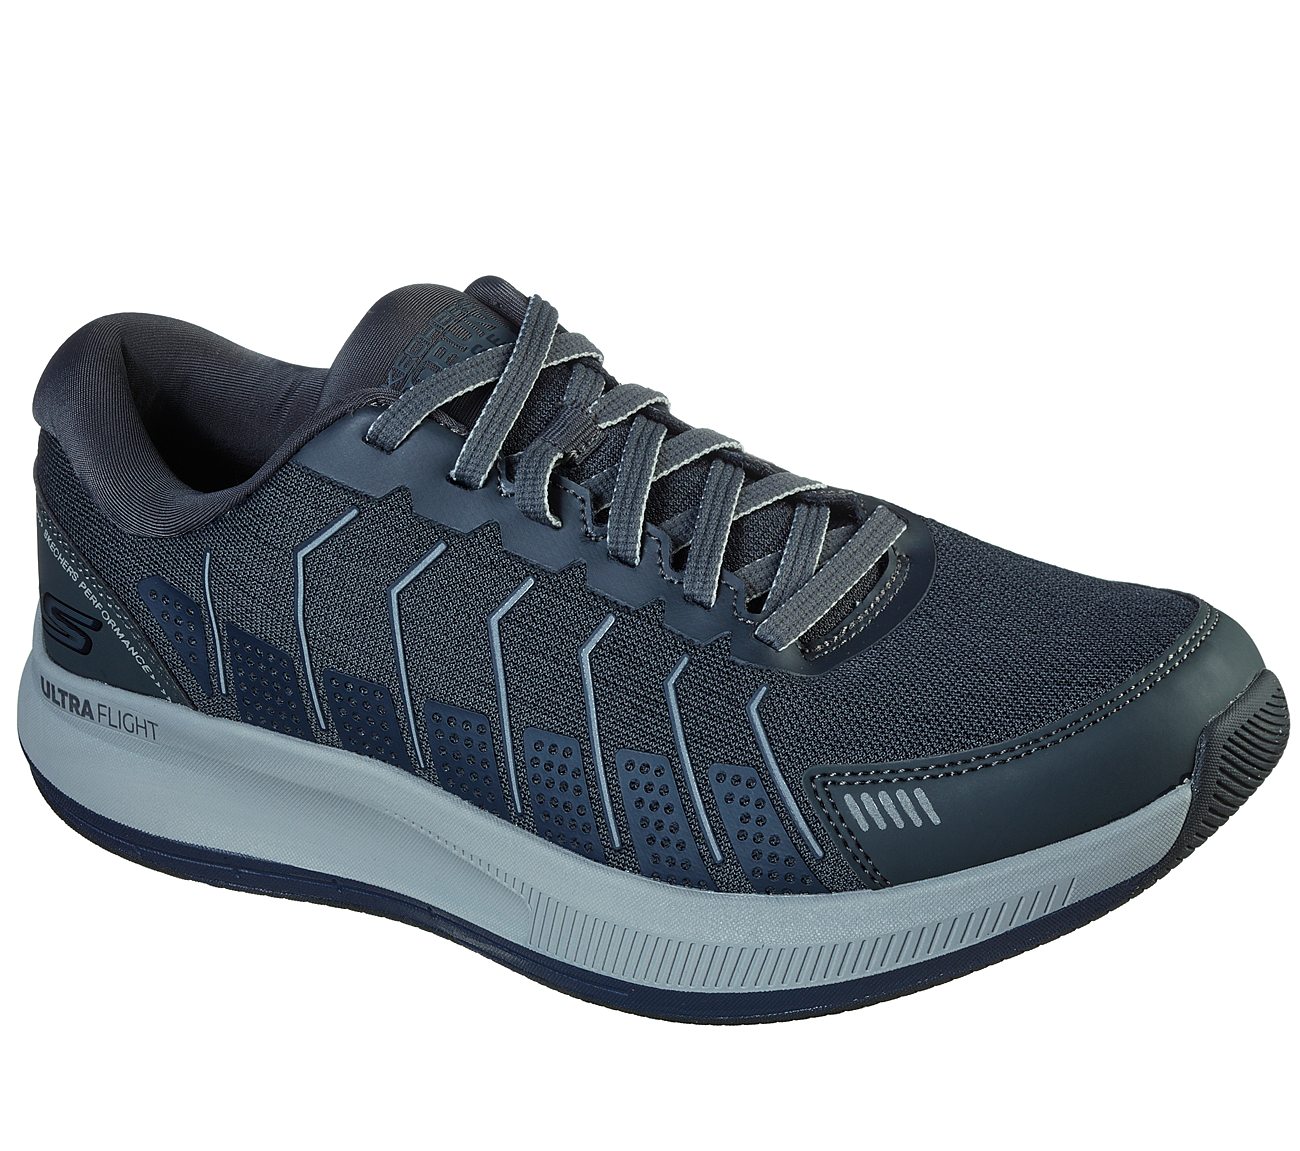 GO RUN PULSE-ALANINE, CHARCOAL/NAVY Footwear Right View